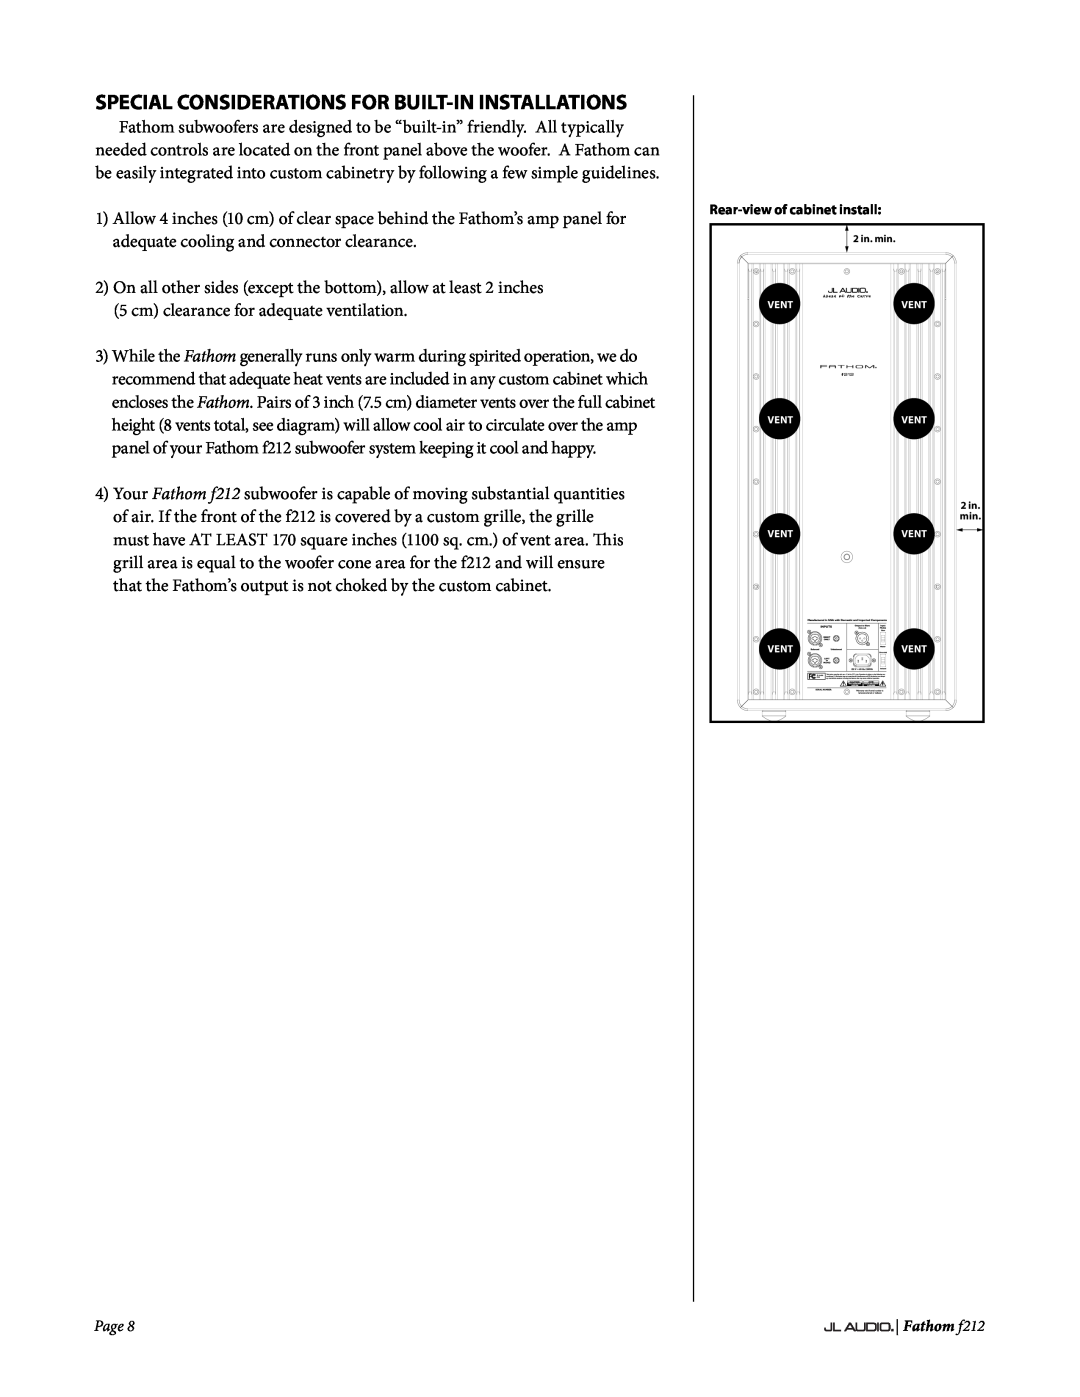 JL Audio f212 owner manual Special Considerations For Built-Ininstallations, Rear-viewof cabinet install 